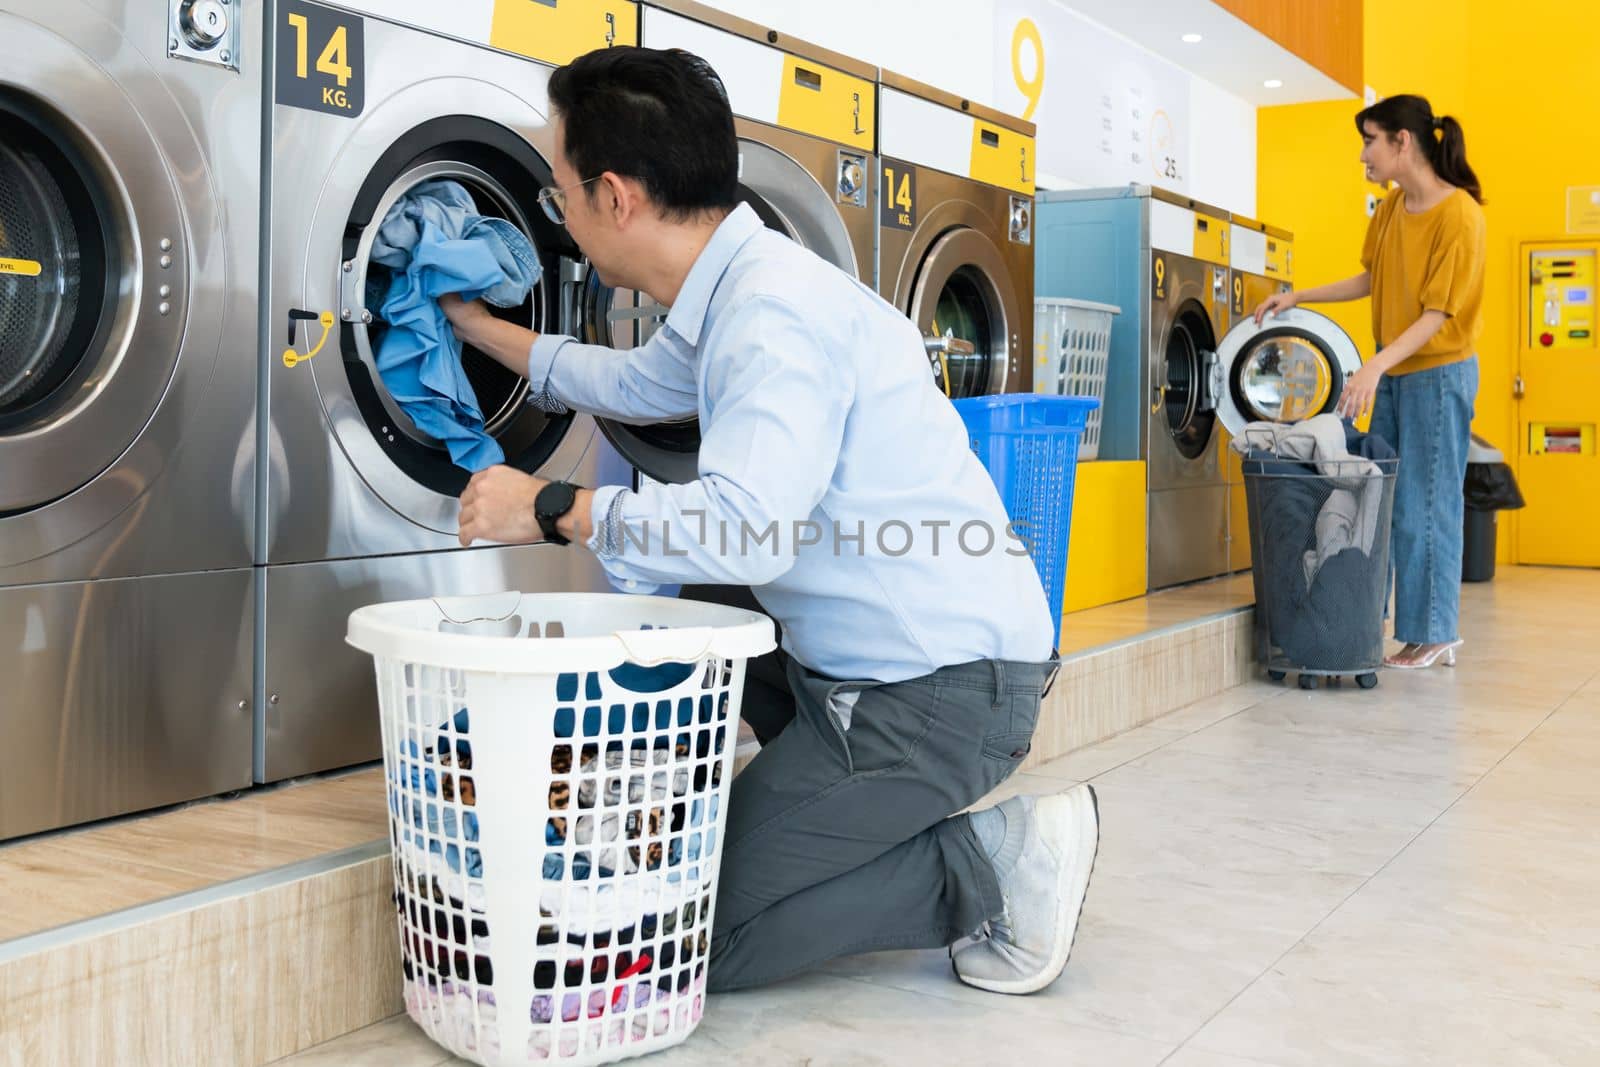 Asian people using qualified laundry machine in the public room. by biancoblue